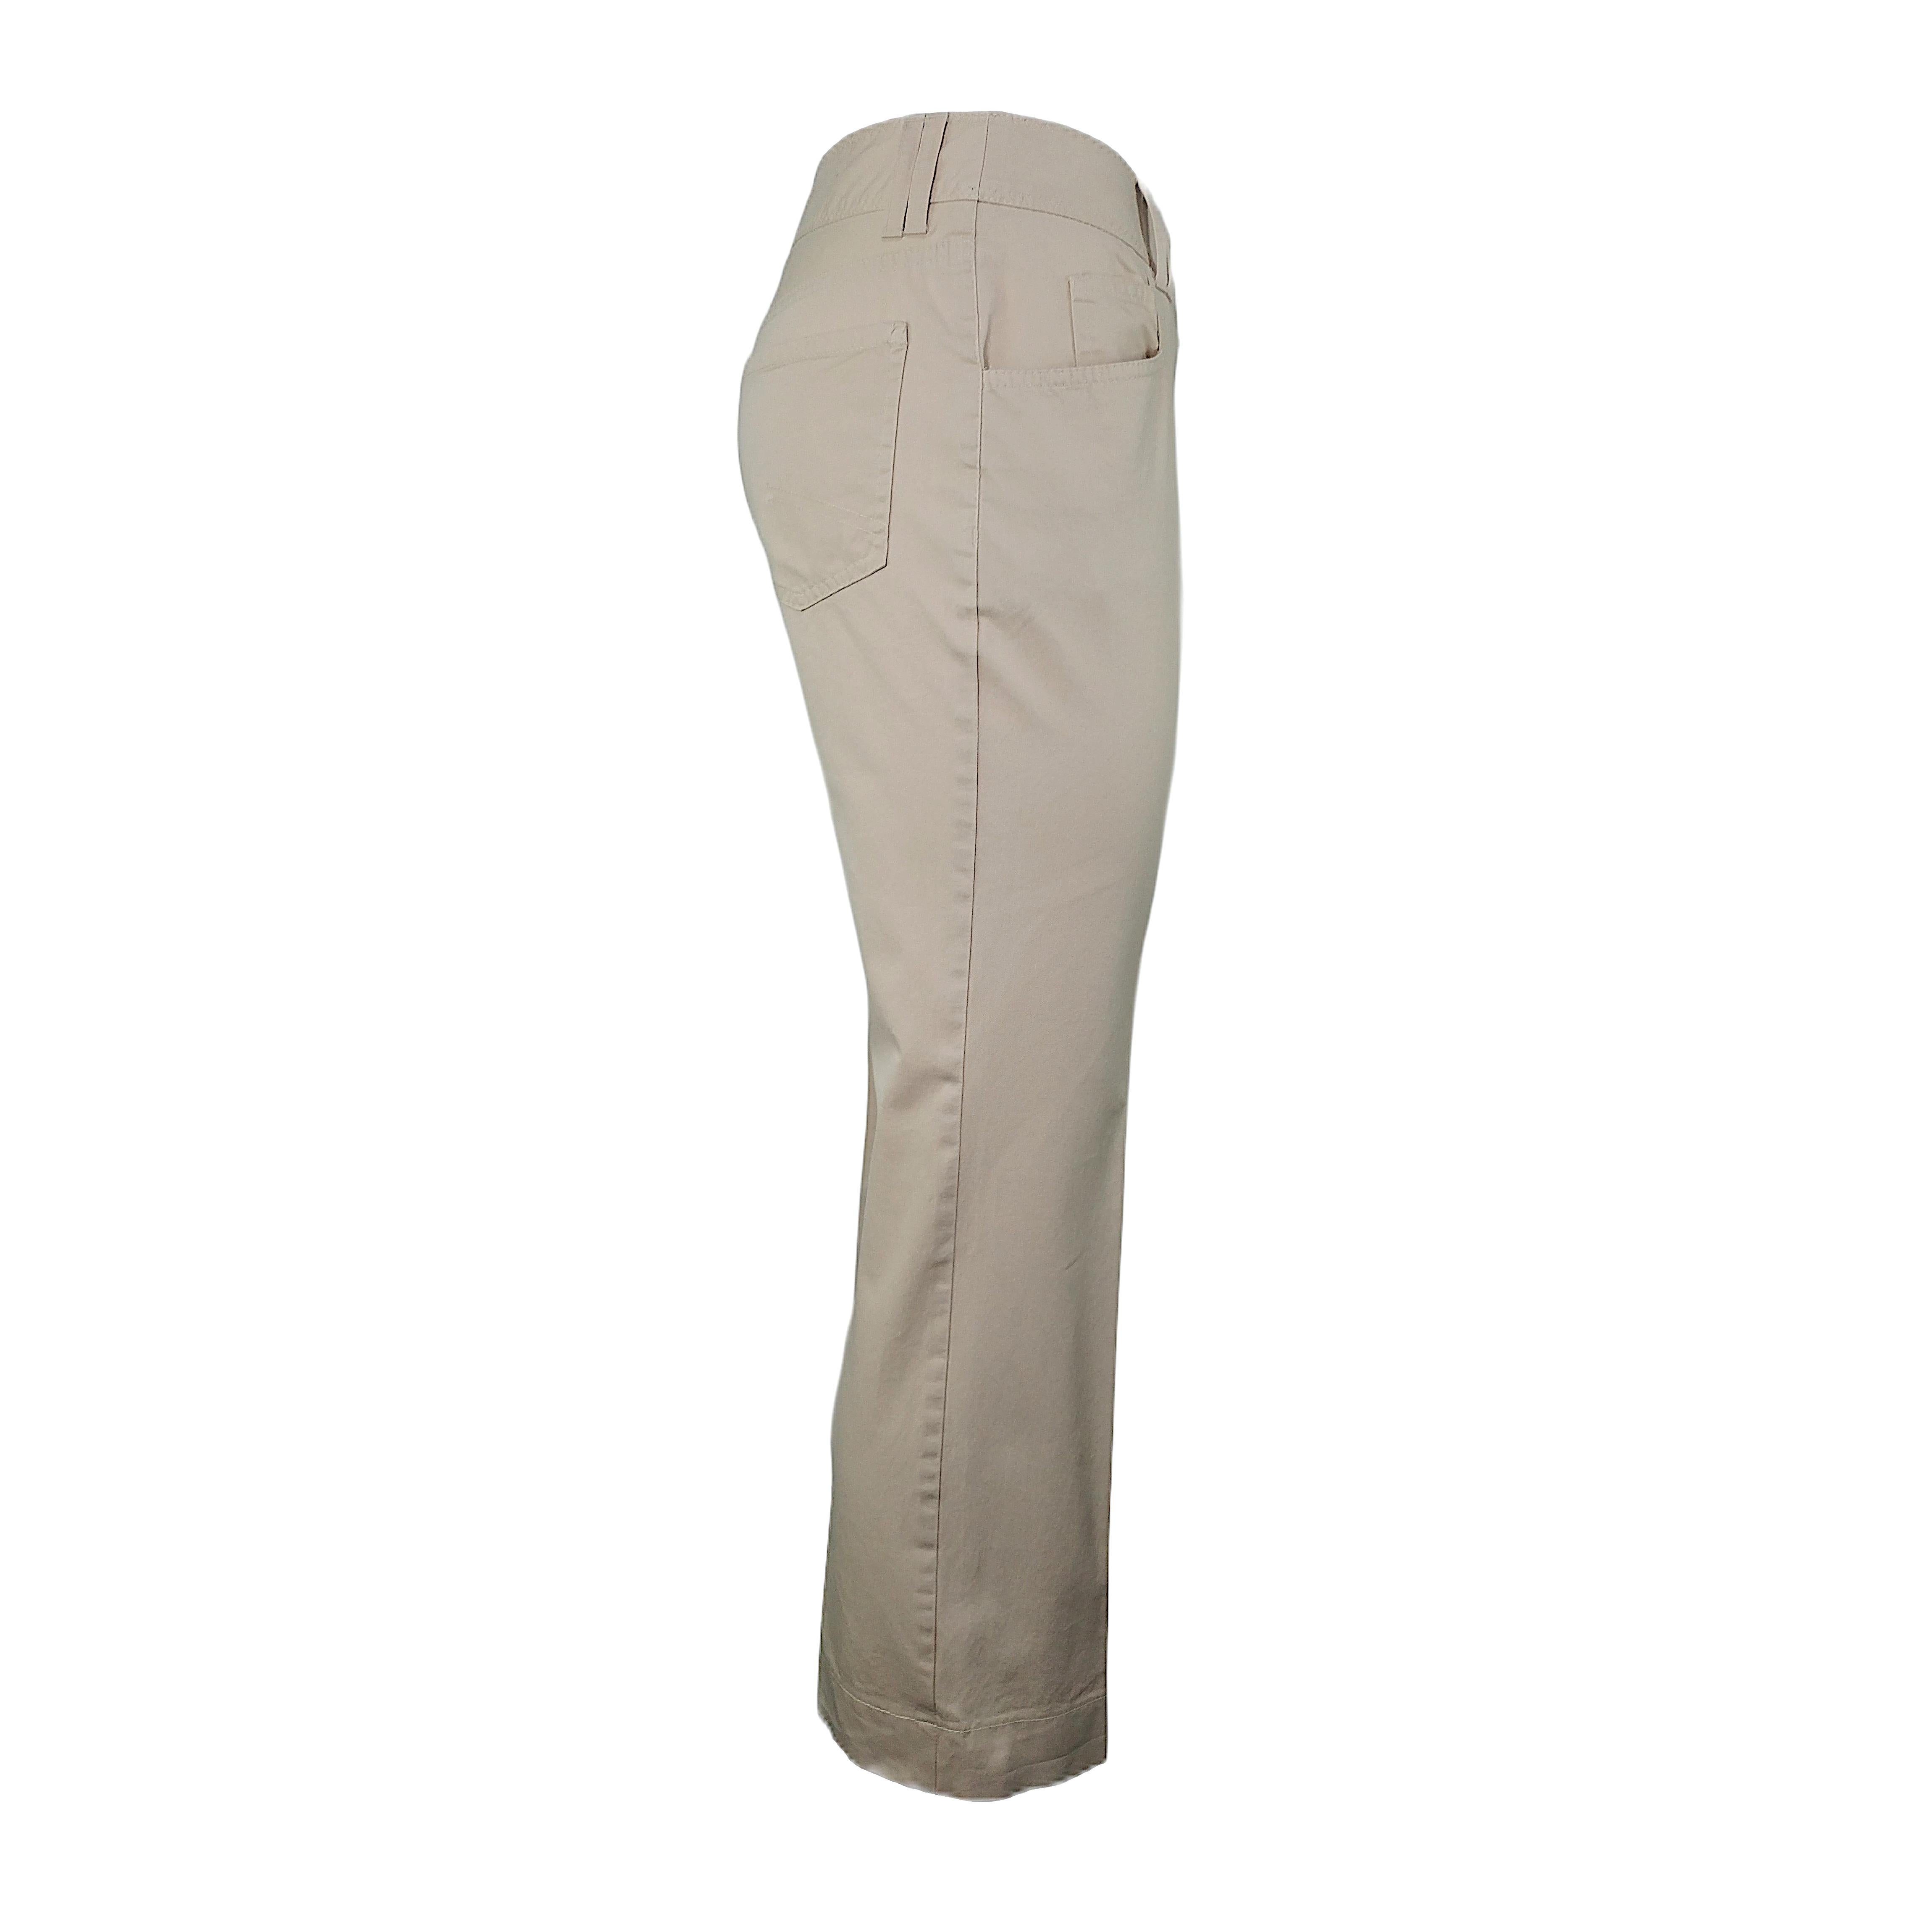 A pair of vintage beige Dior pants with a 5-pockets design, a mid-low rise, closure with snap button and hook, and 7/8 calf length. Although the label is discolored, you can clearly feel this is cotton fabric. The pants are in good vintage